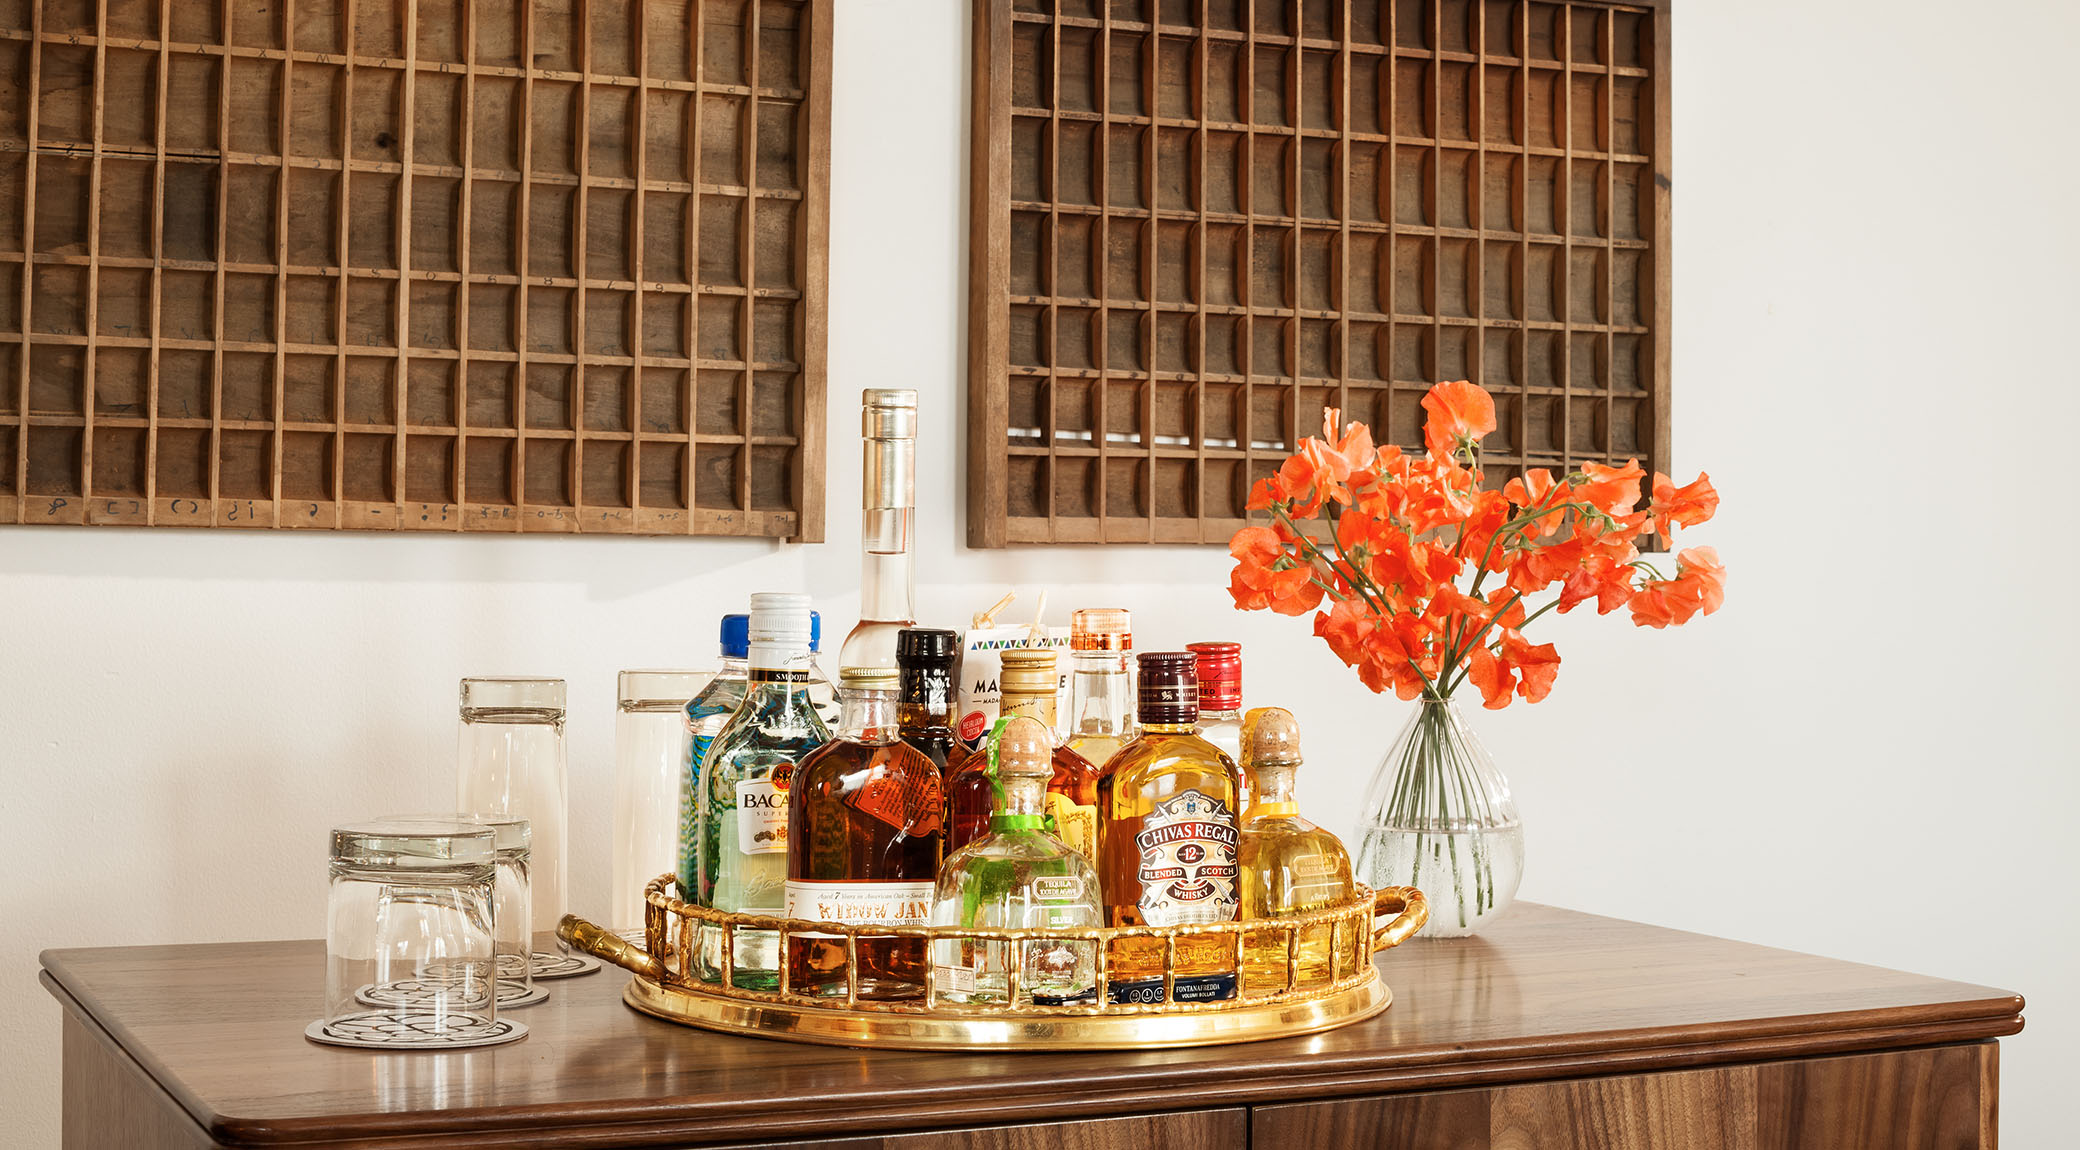 table top bar with several alcoholic beverages and a vase with several orange flowers